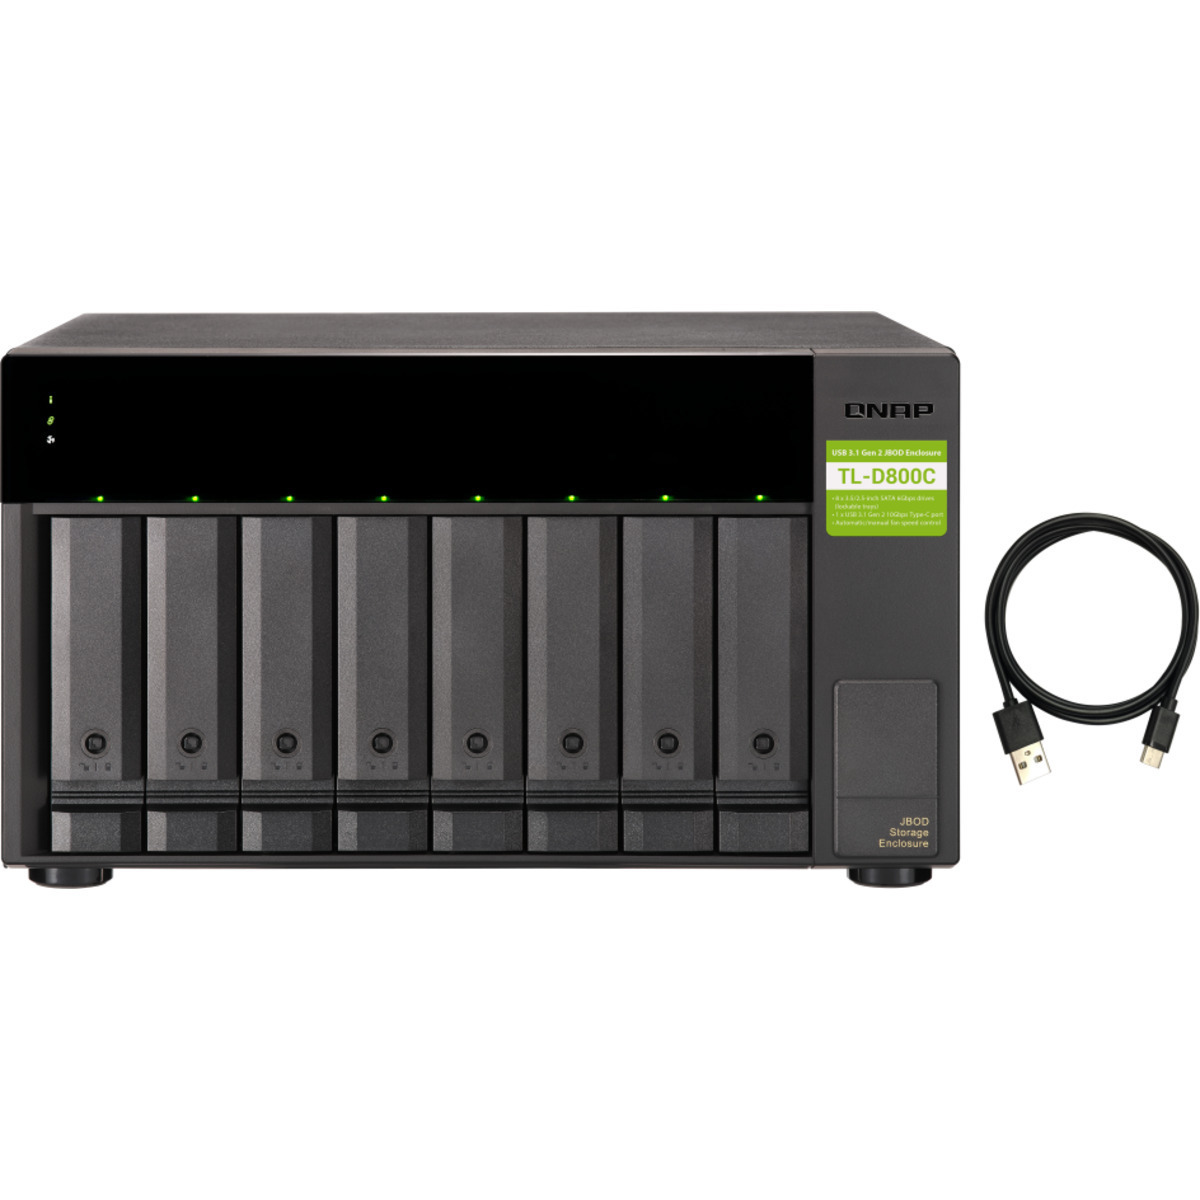 QNAP TL-D800C External Expansion Drive 32tb 8-Bay Desktop Multimedia / Power User / Business Expansion Enclosure 8x4tb Seagate IronWolf ST4000VN006 3.5 5400rpm SATA 6Gb/s HDD NAS Class Drives Installed - Burn-In Tested TL-D800C External Expansion Drive